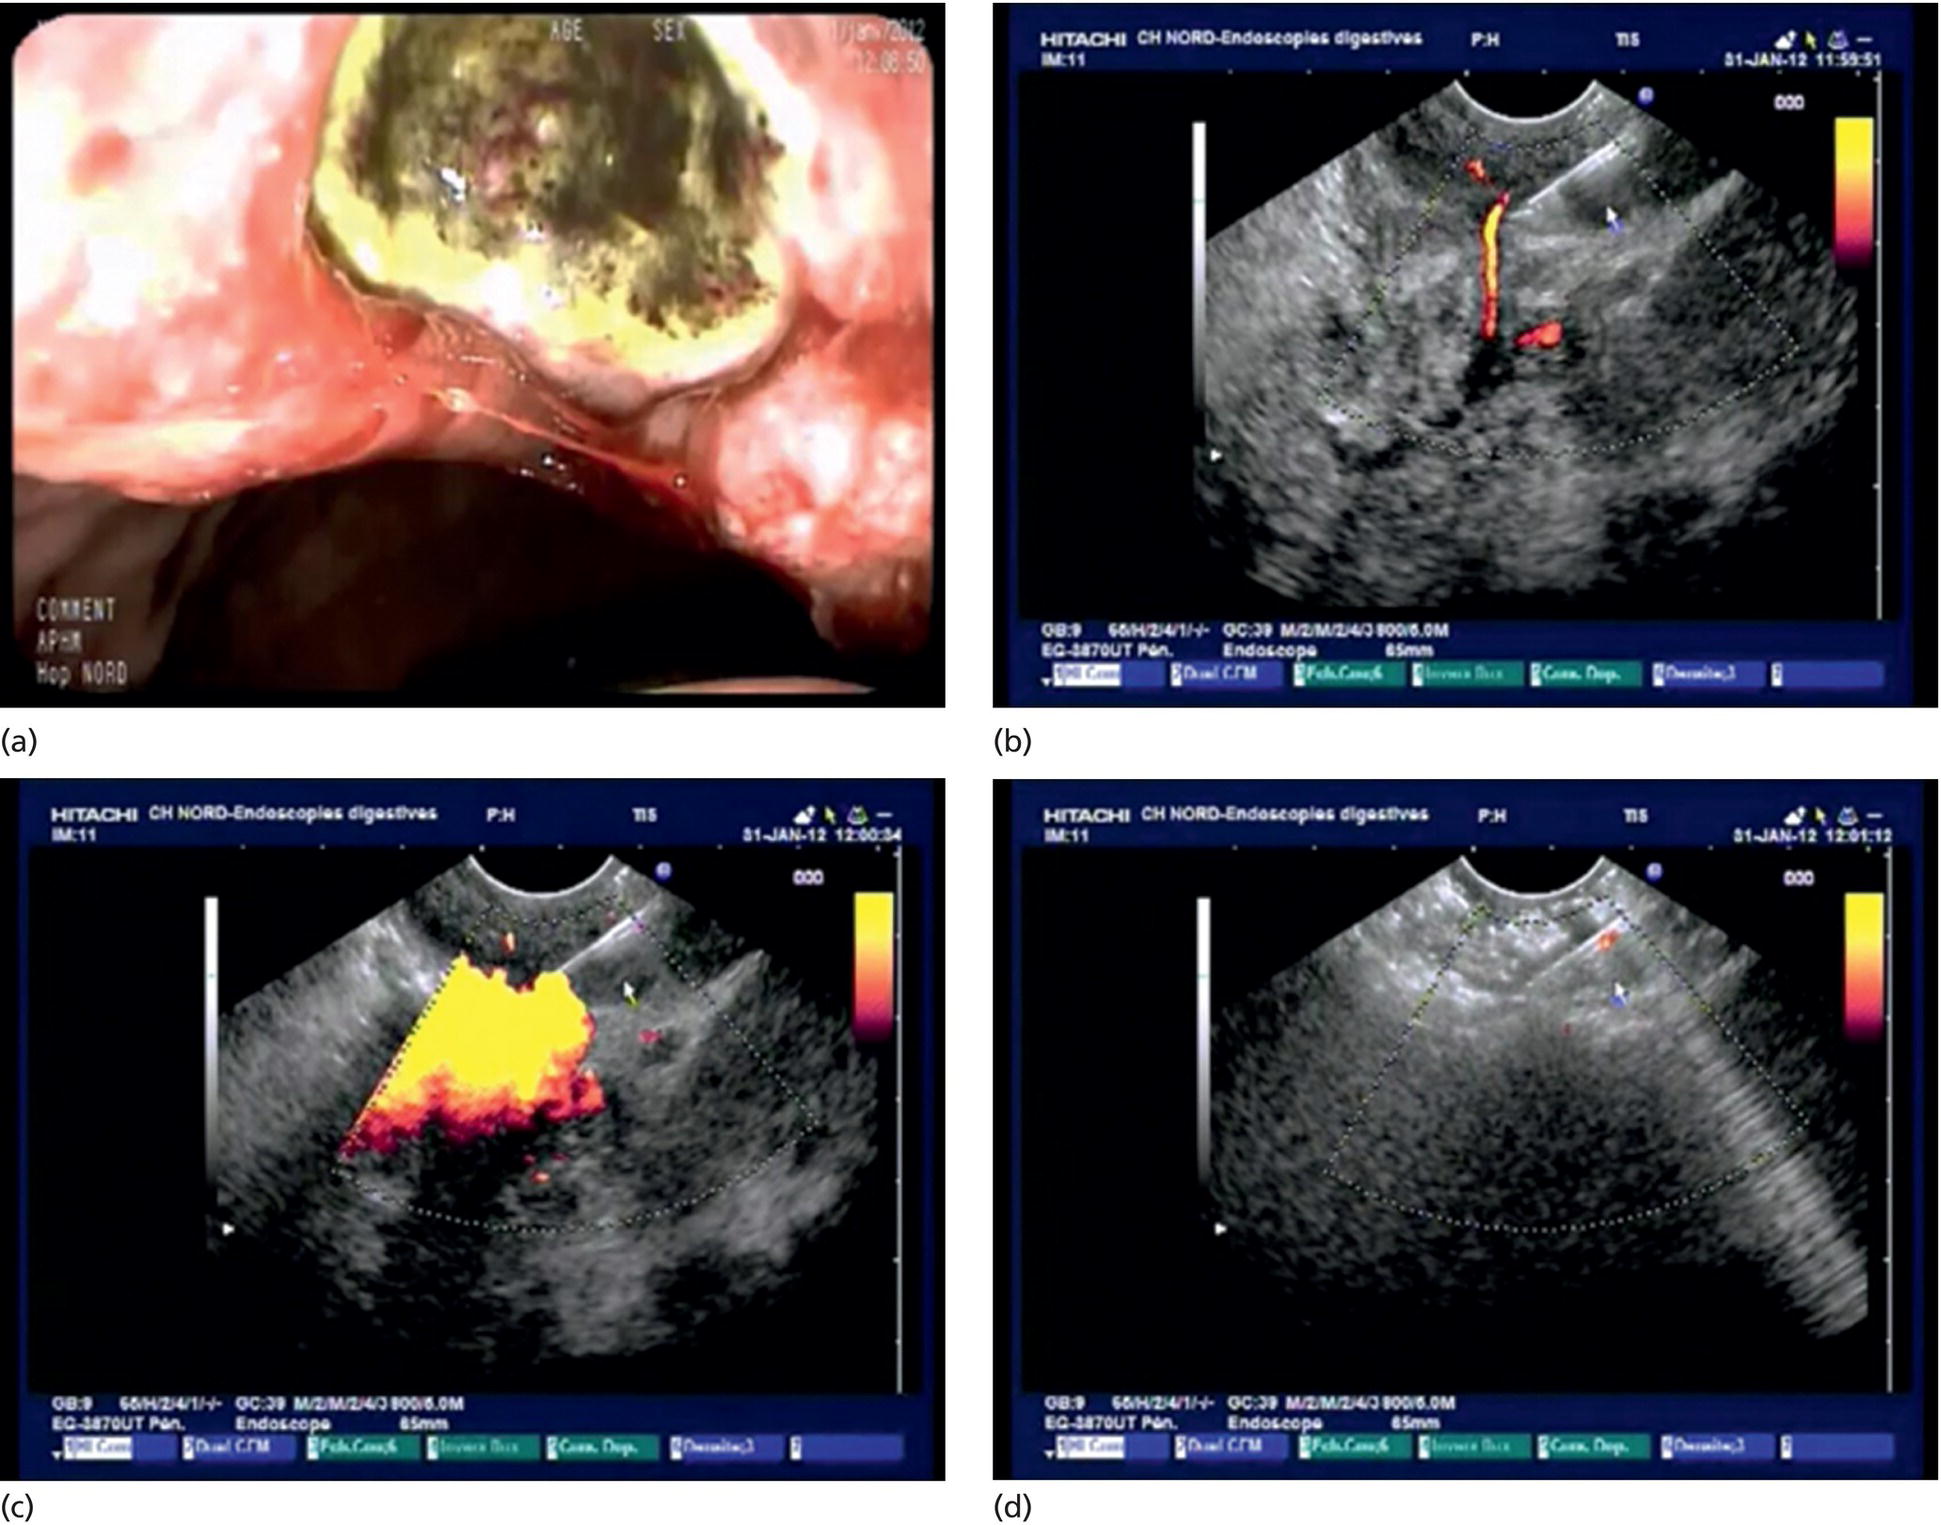 Photos depict patient 1 with refractory bleeding due to gastric cancer.